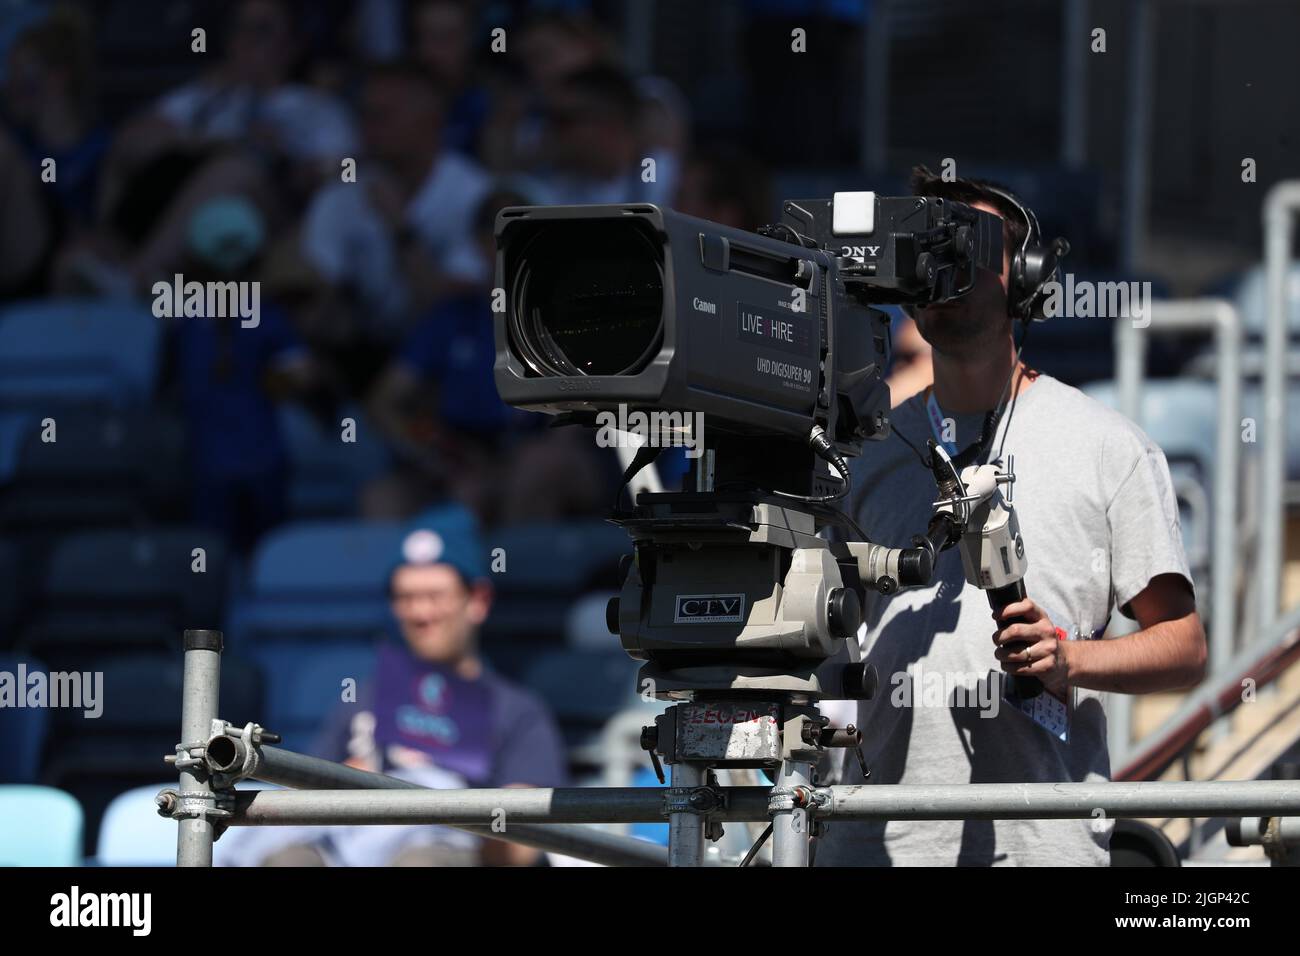 Canon TV Broadcast Camera and male Operator on scaffold gantry platform at Sports Event Stock Photo